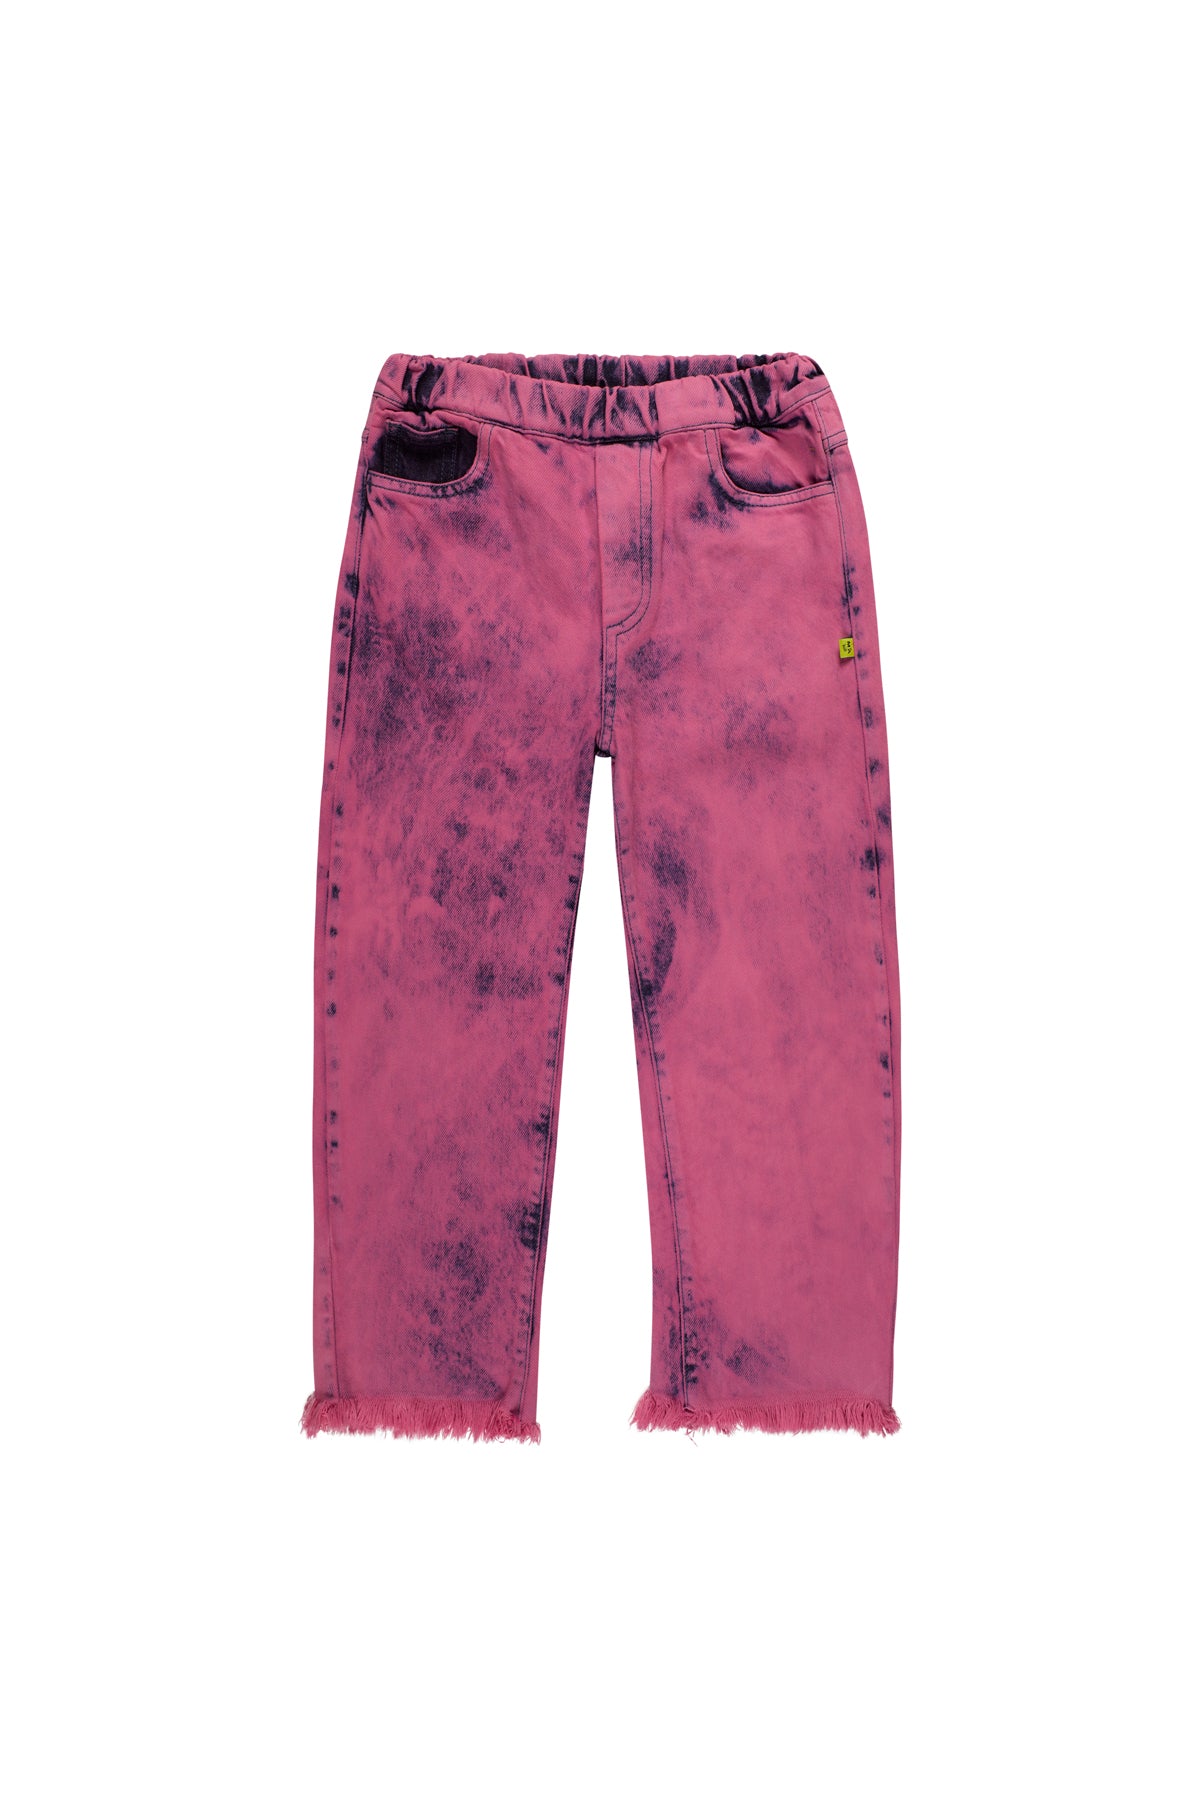 PINK BAGGY TROUSERS marques almeida